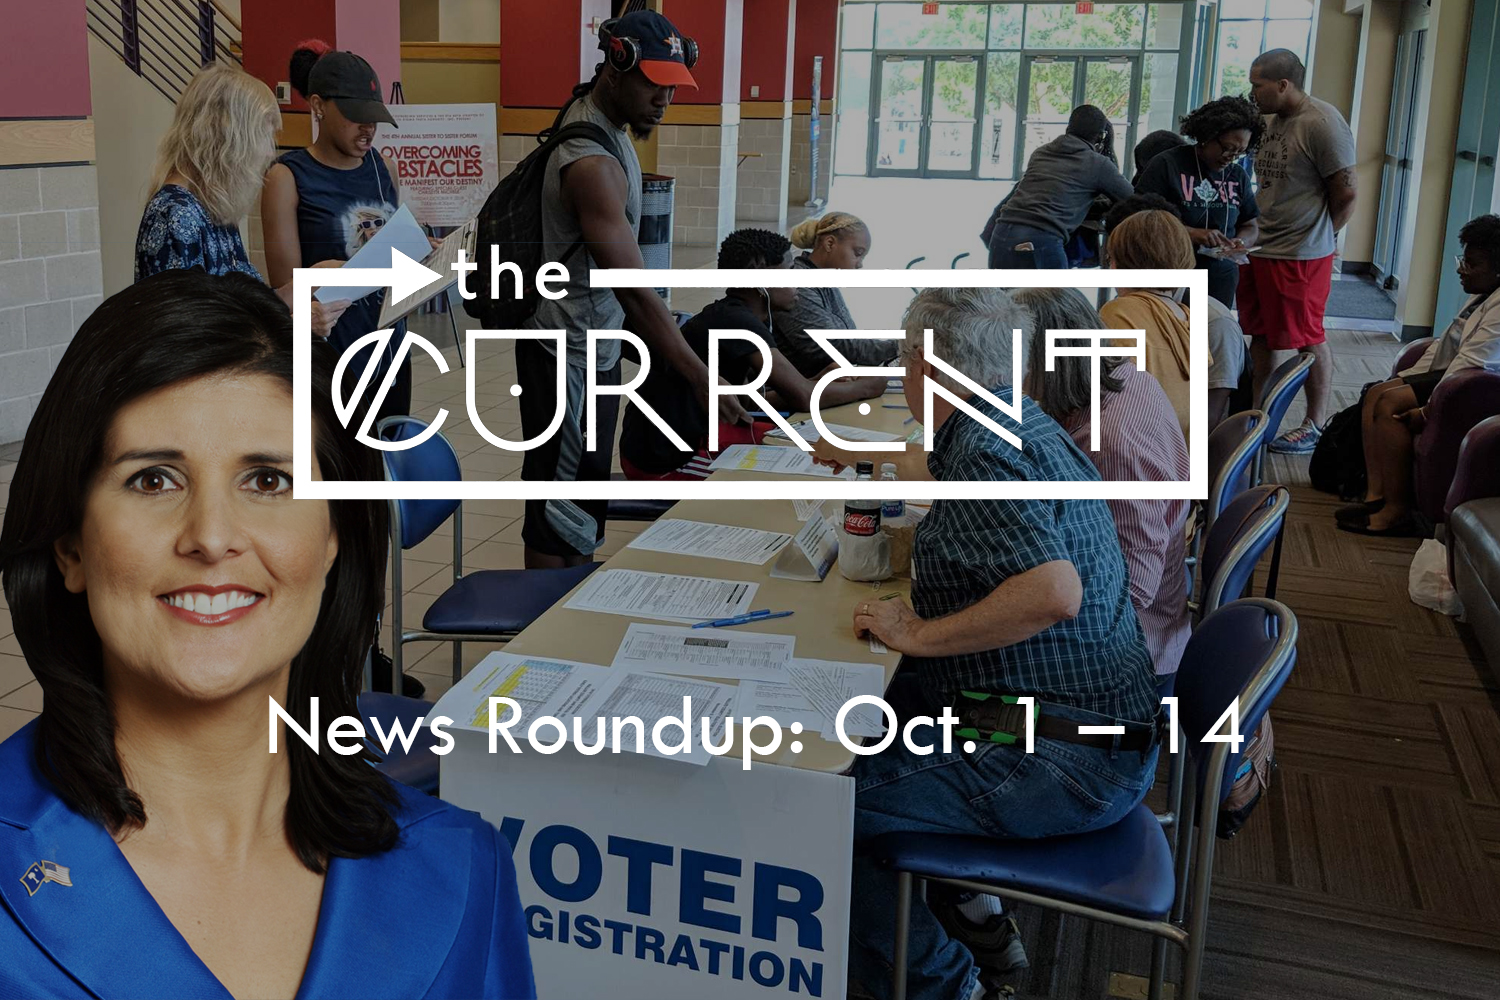 GRAPHIC: News round up for the first two weeks of October. Graphic created by The Signal Reporter Trey Blakely and Online Editor Alyssa Shotwell.